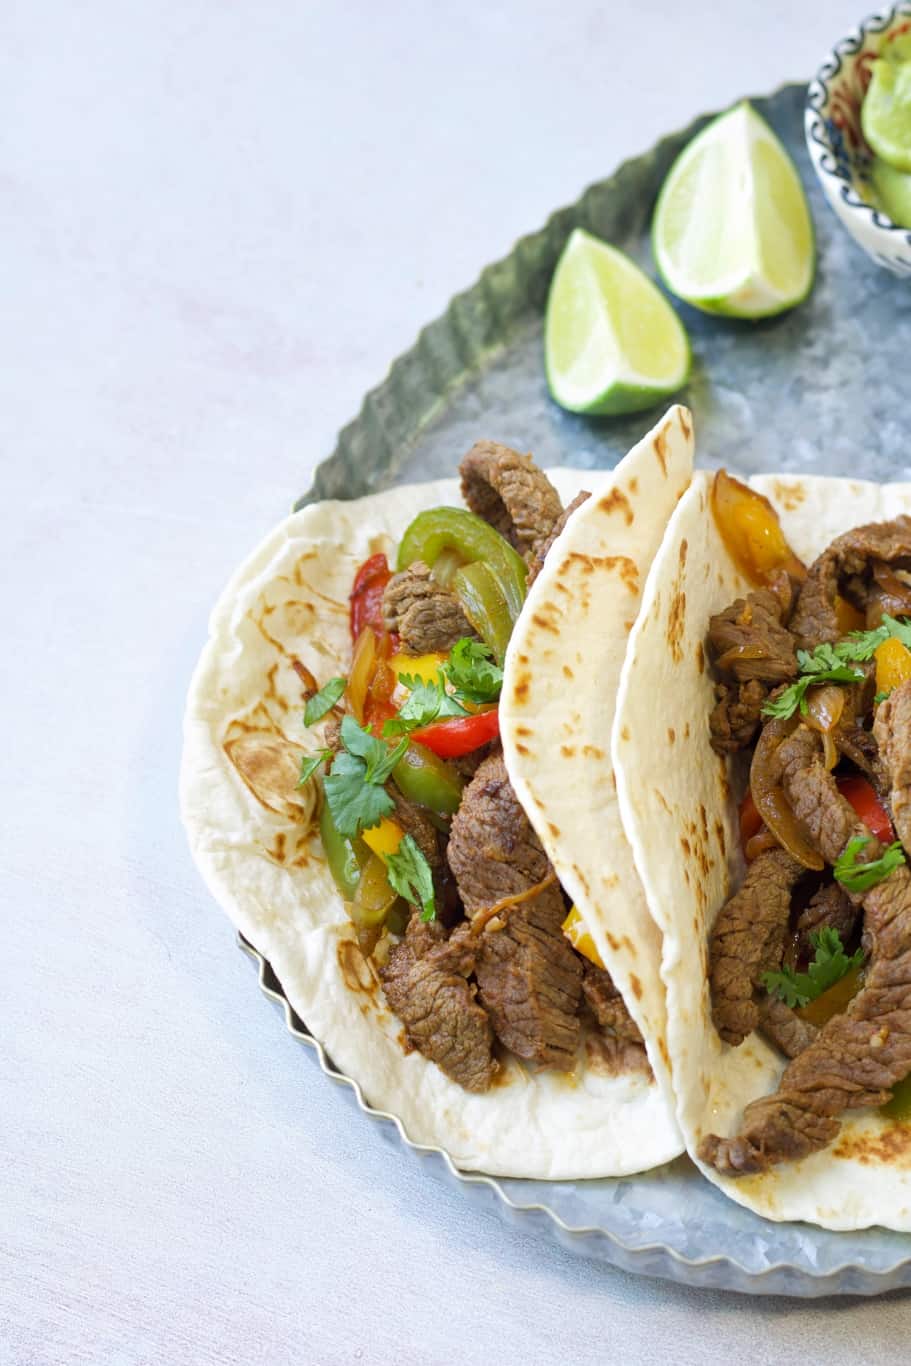 low-carb tortillas filled with cooked skirt steak, onions, green, red, and yellow bell peppers and served with lime wedges